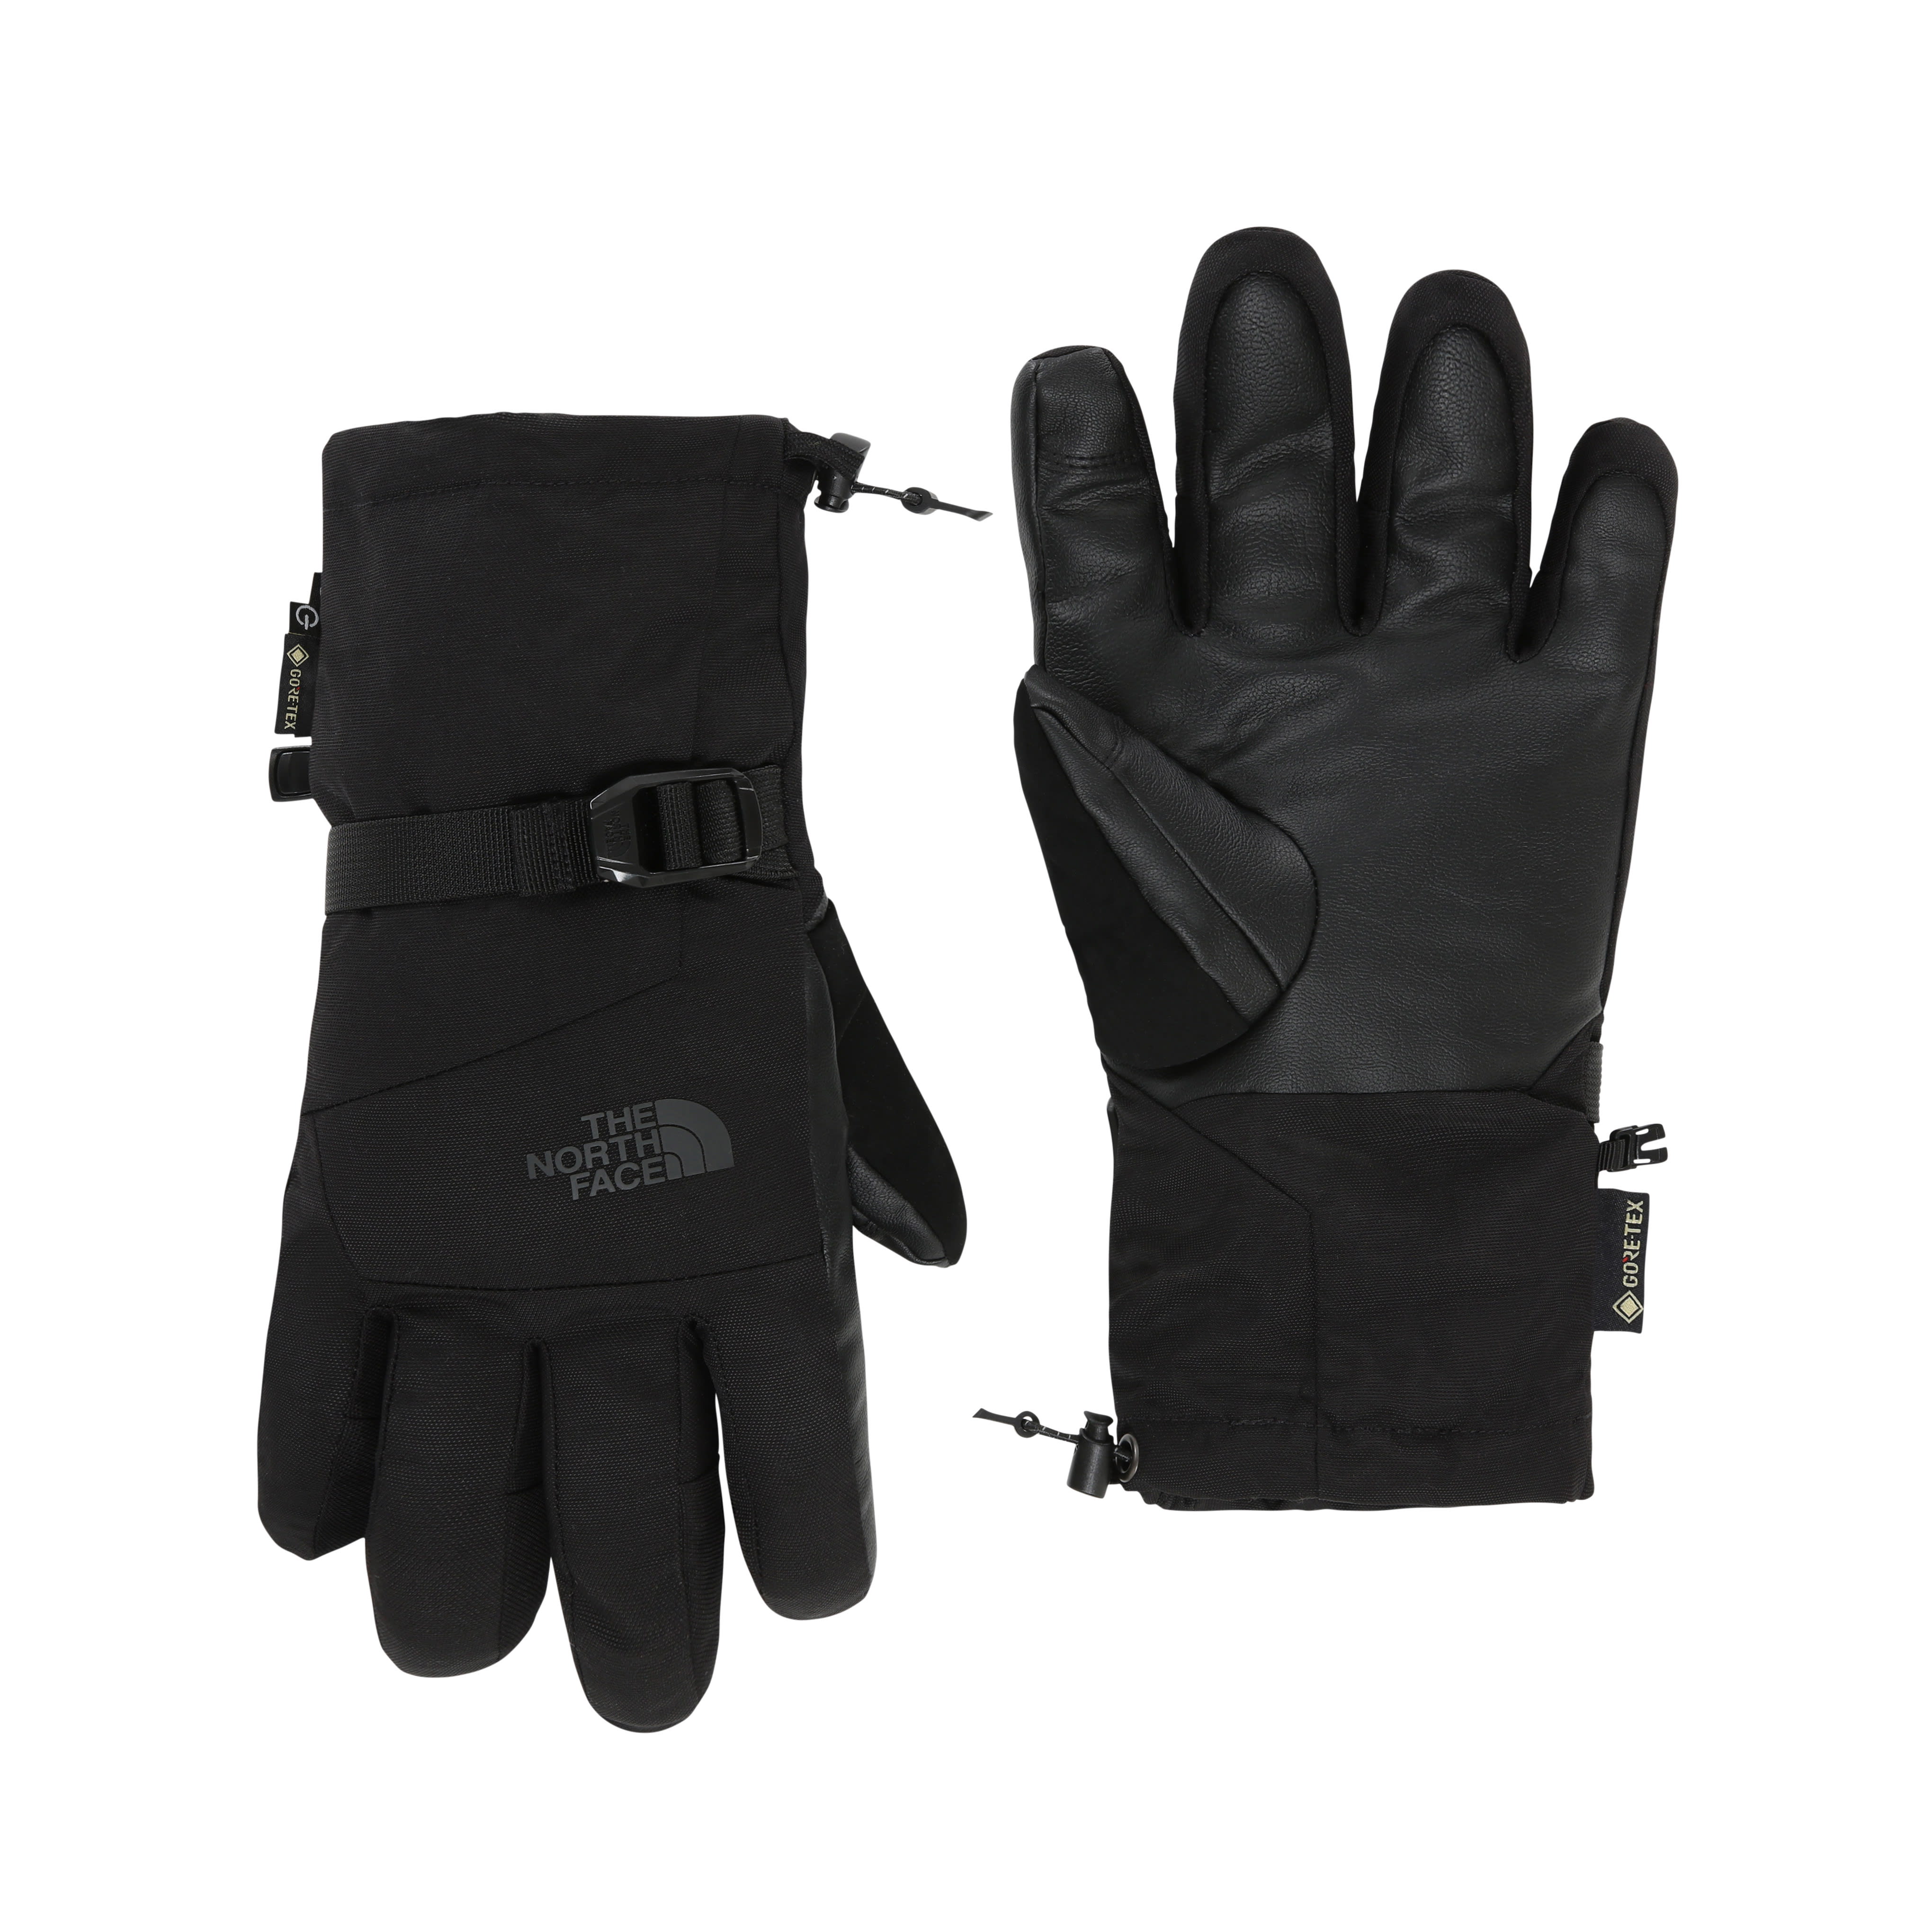 Buy The North Face Men’s Montana GORE-TEX® Etip™ Ski Gloves from Outnorth